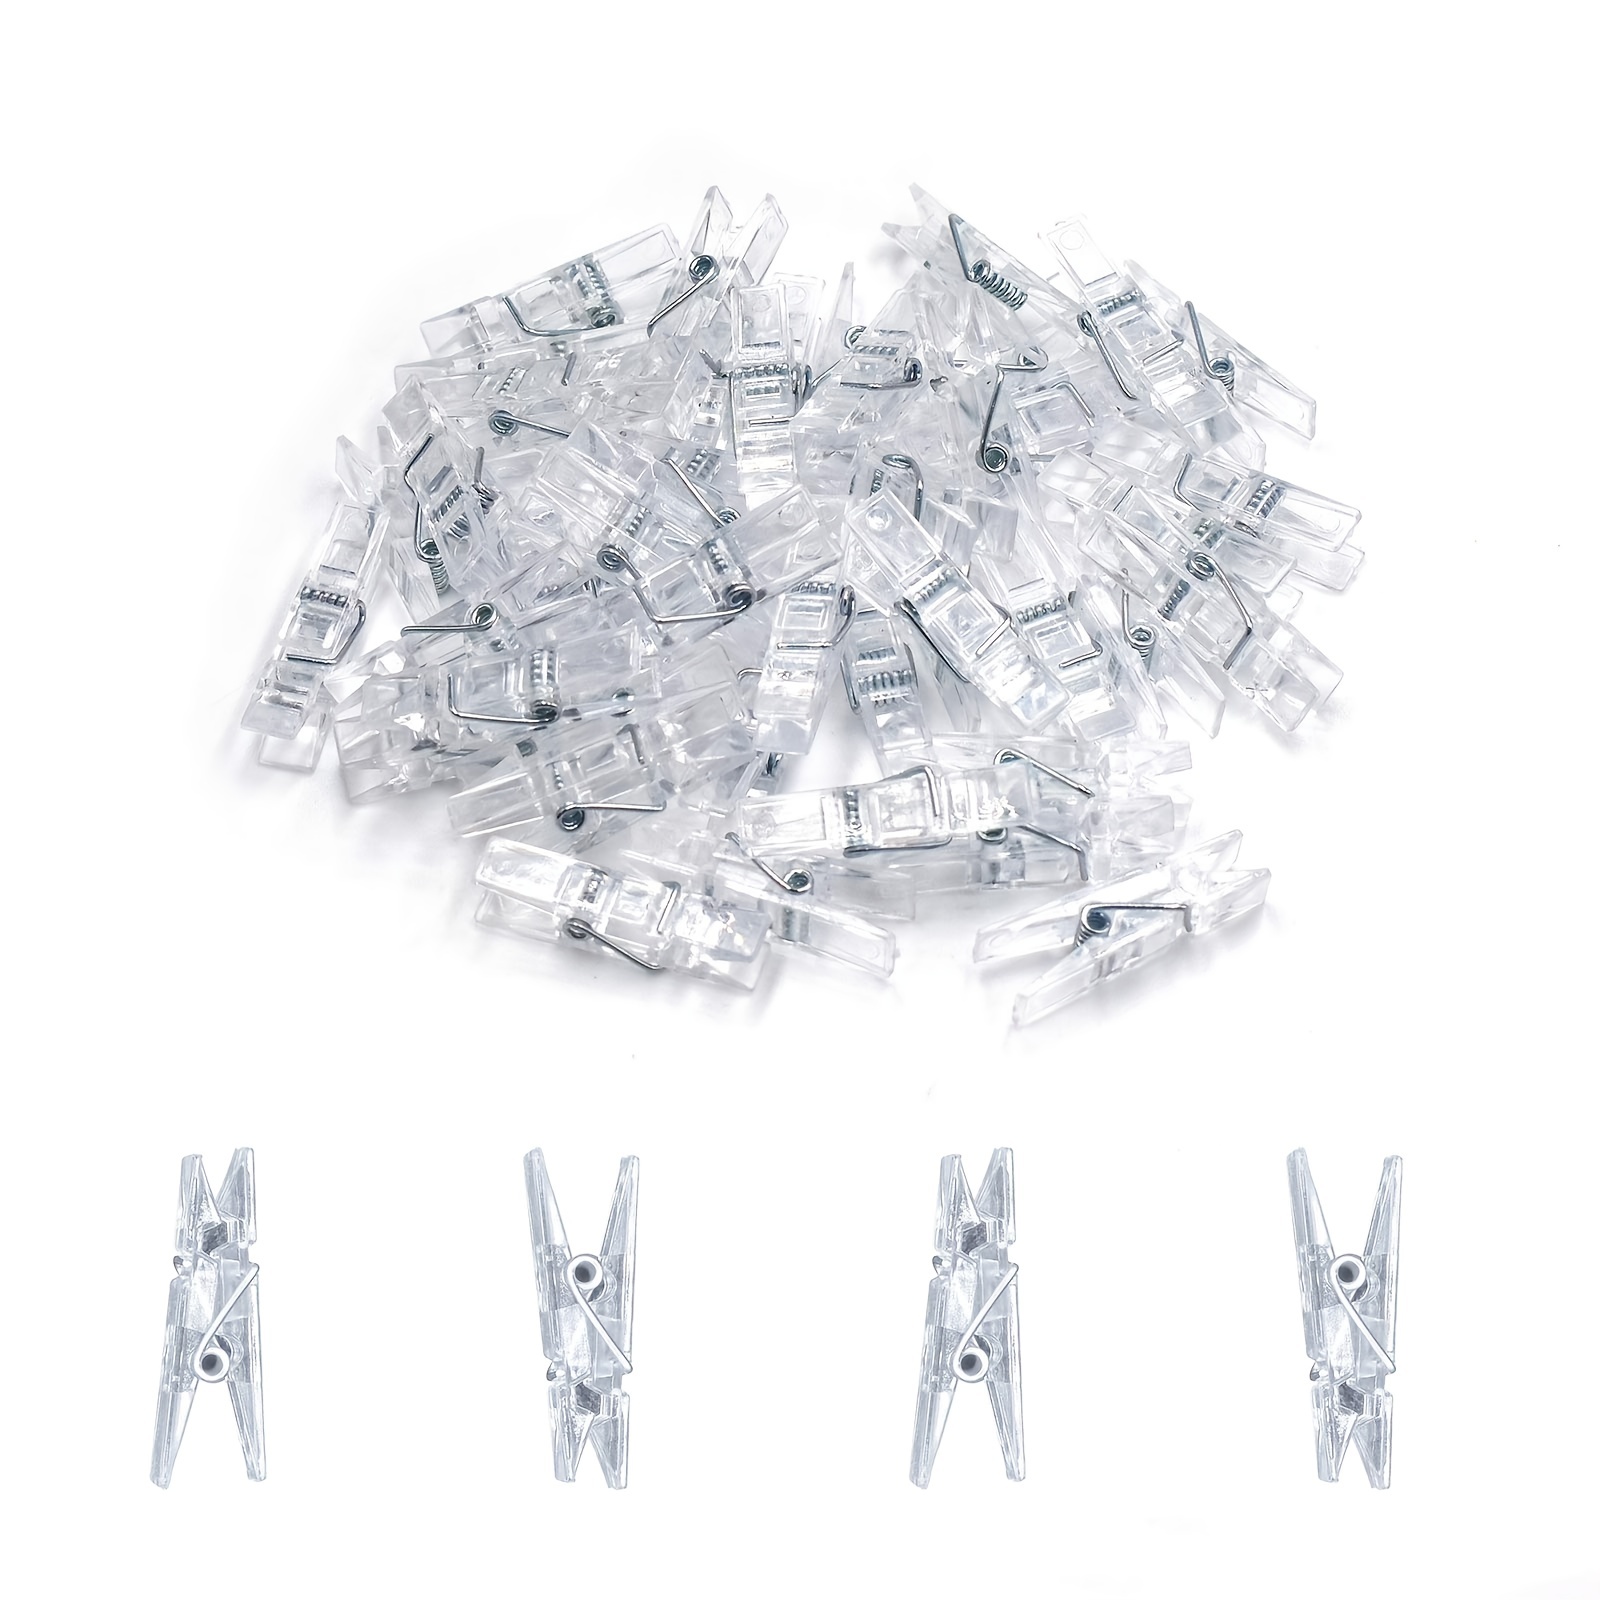 100pcs Mini Pegs For Photos Tiny Photo Clips, Clear Plastic Clothes Pegs,  Plastic Photo Paper Clip, Small Clothespins For Pictures Decorative Pegs For